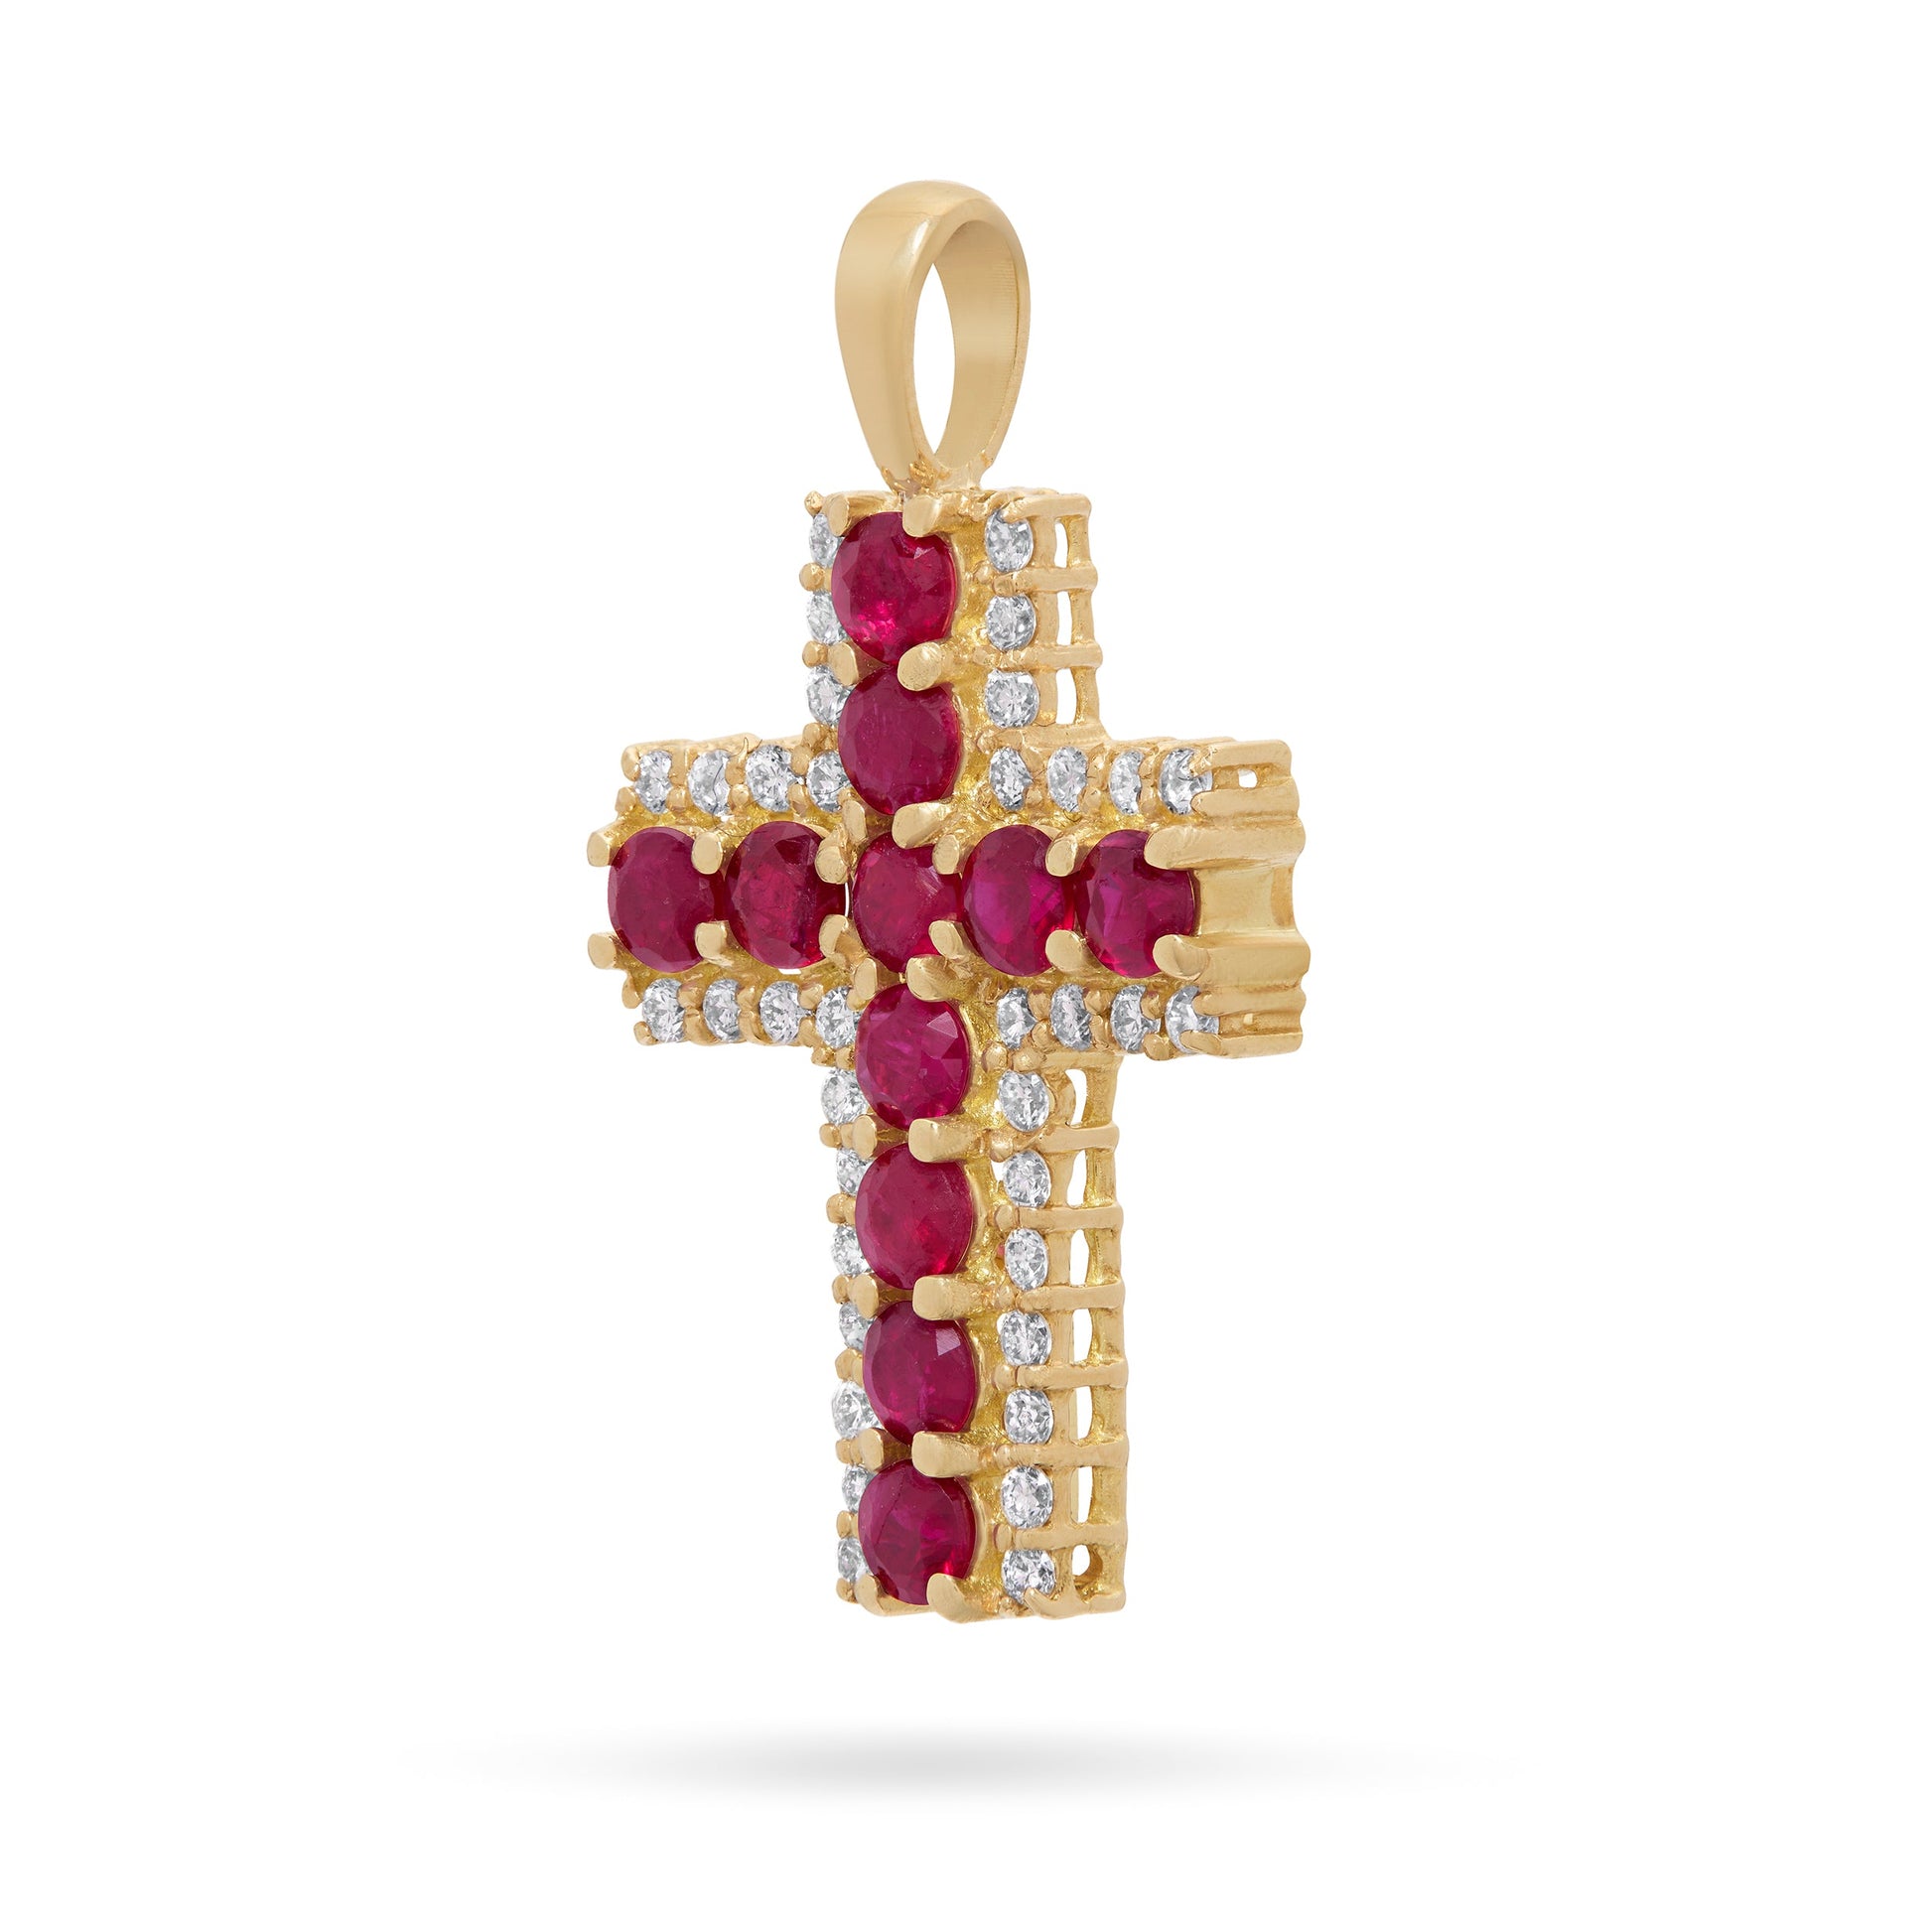 Mondo Cattolico Pendant 13x18 mm (0.51x0.71 in) Yellow Gold Cross Pendant with Central Rubies and Diamonds